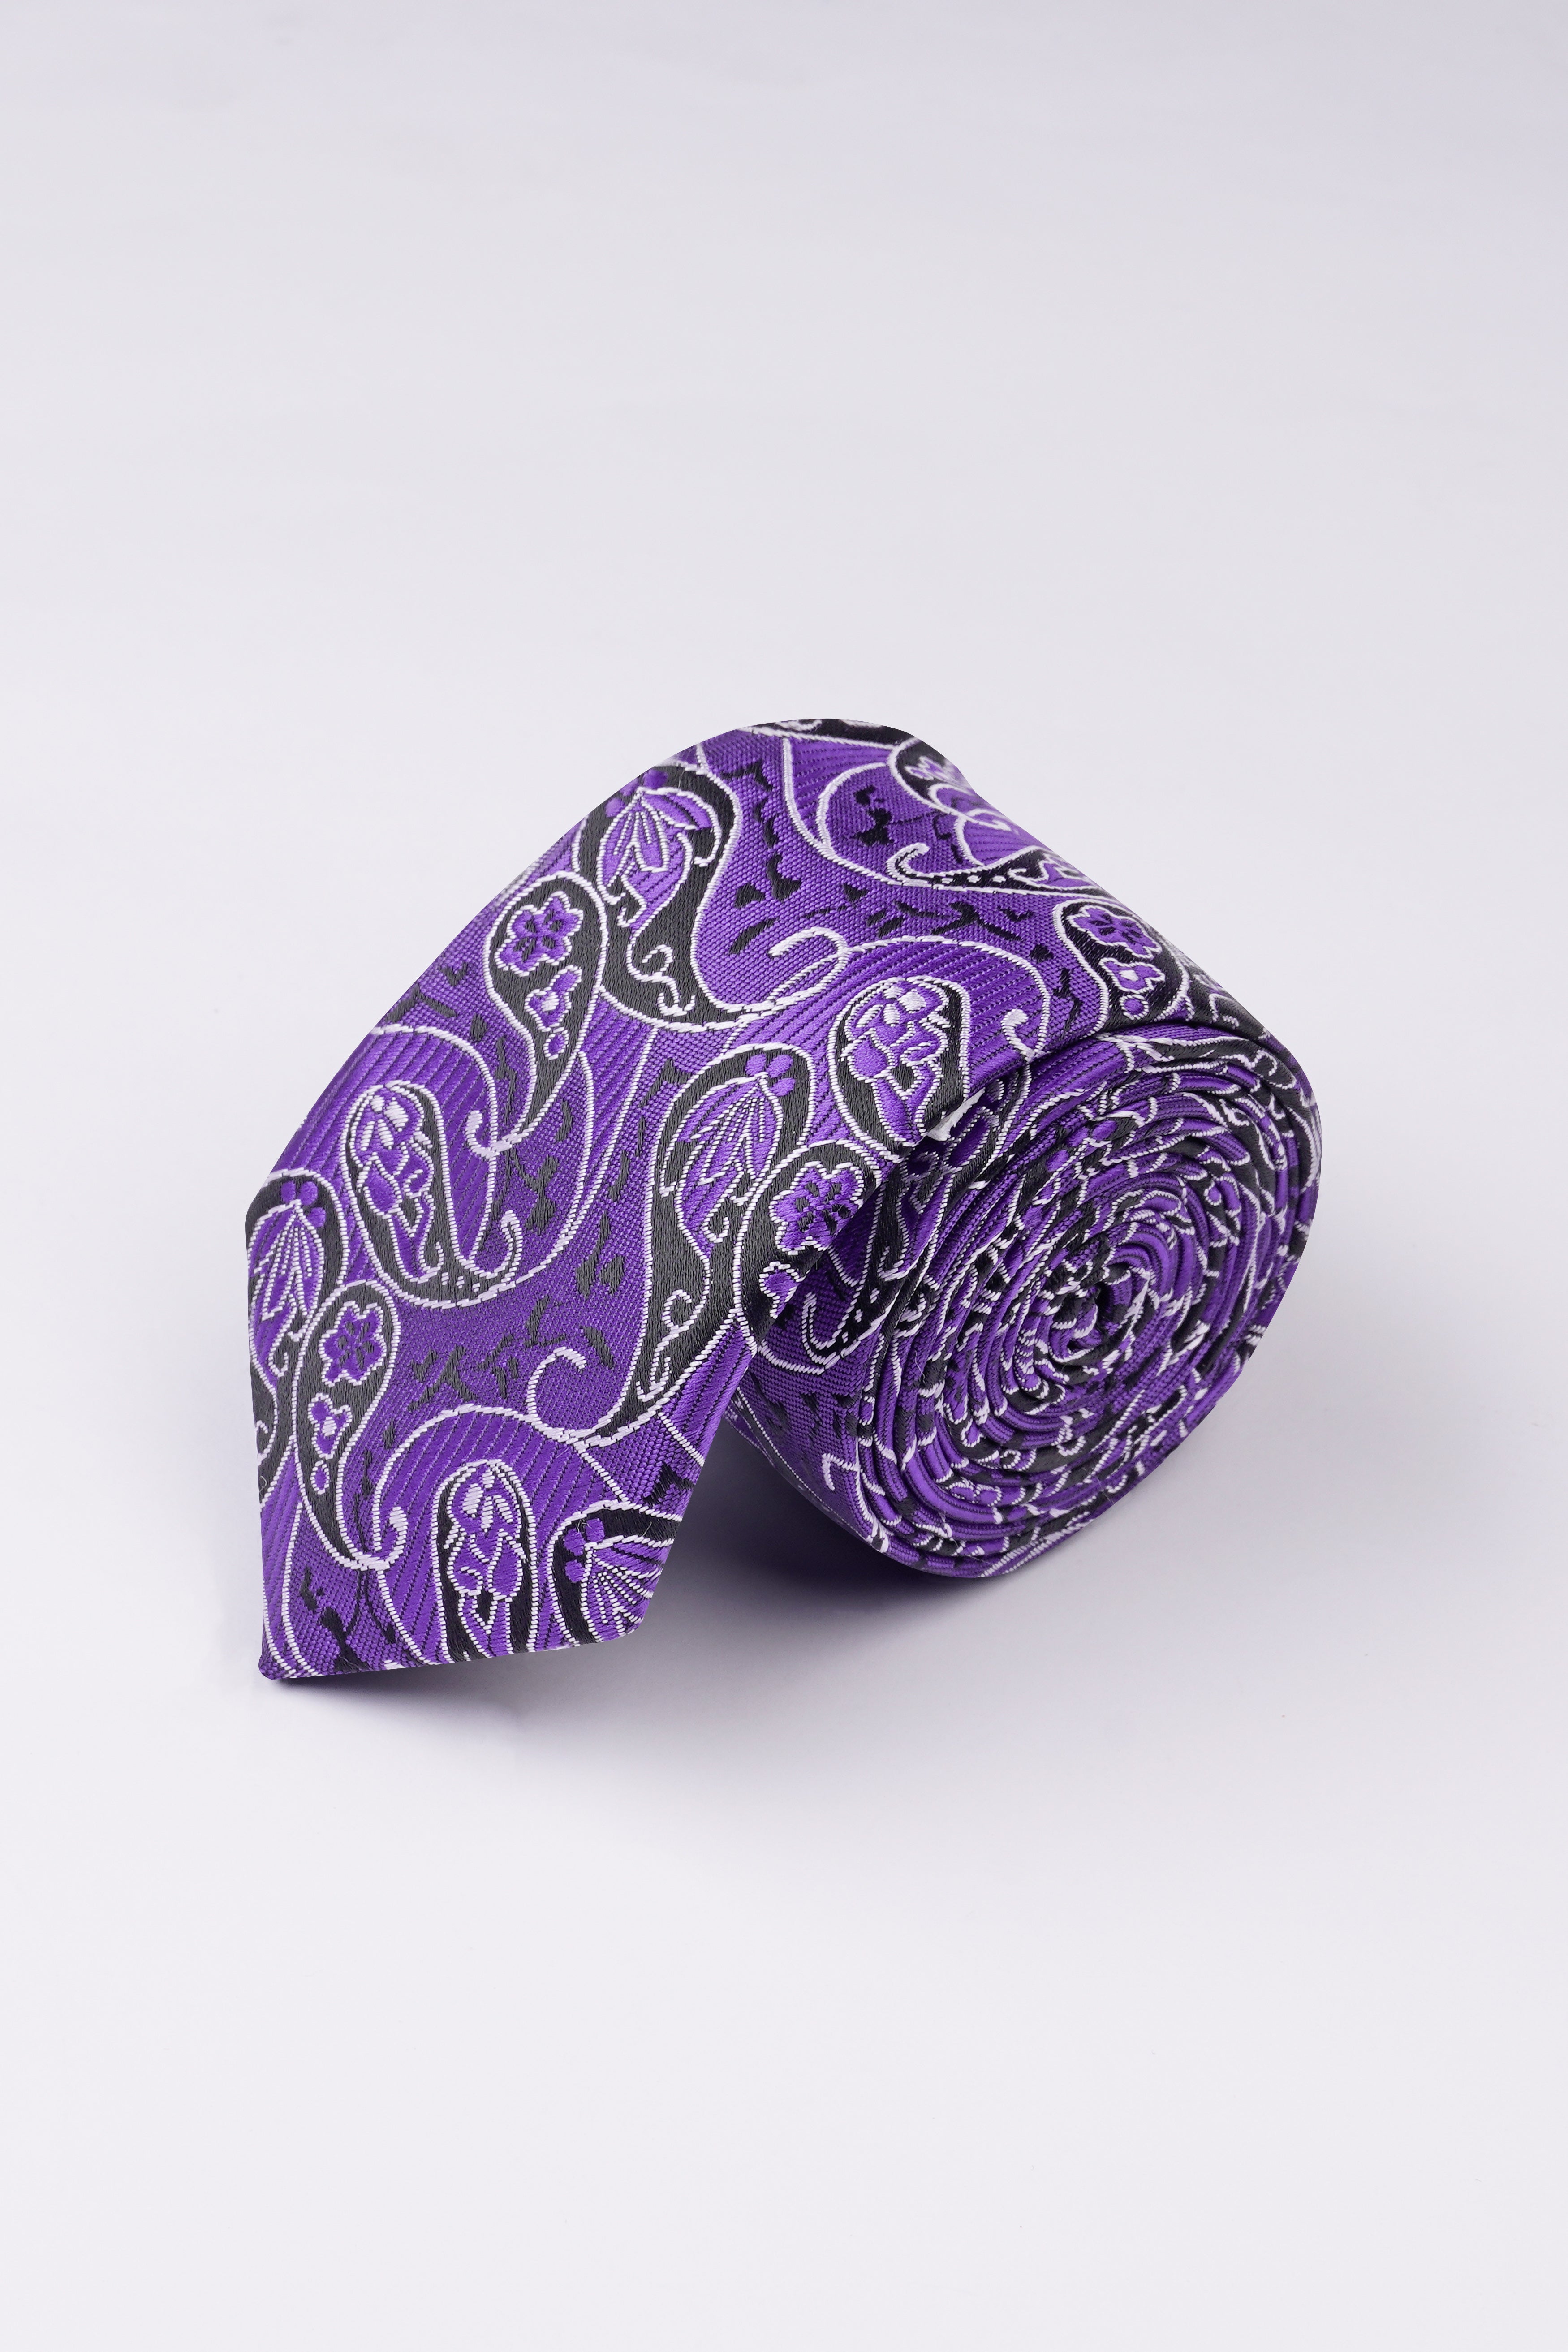 Scampi Purple with Black and White Paisley Jacquard Tie with Pocket Square  TP052